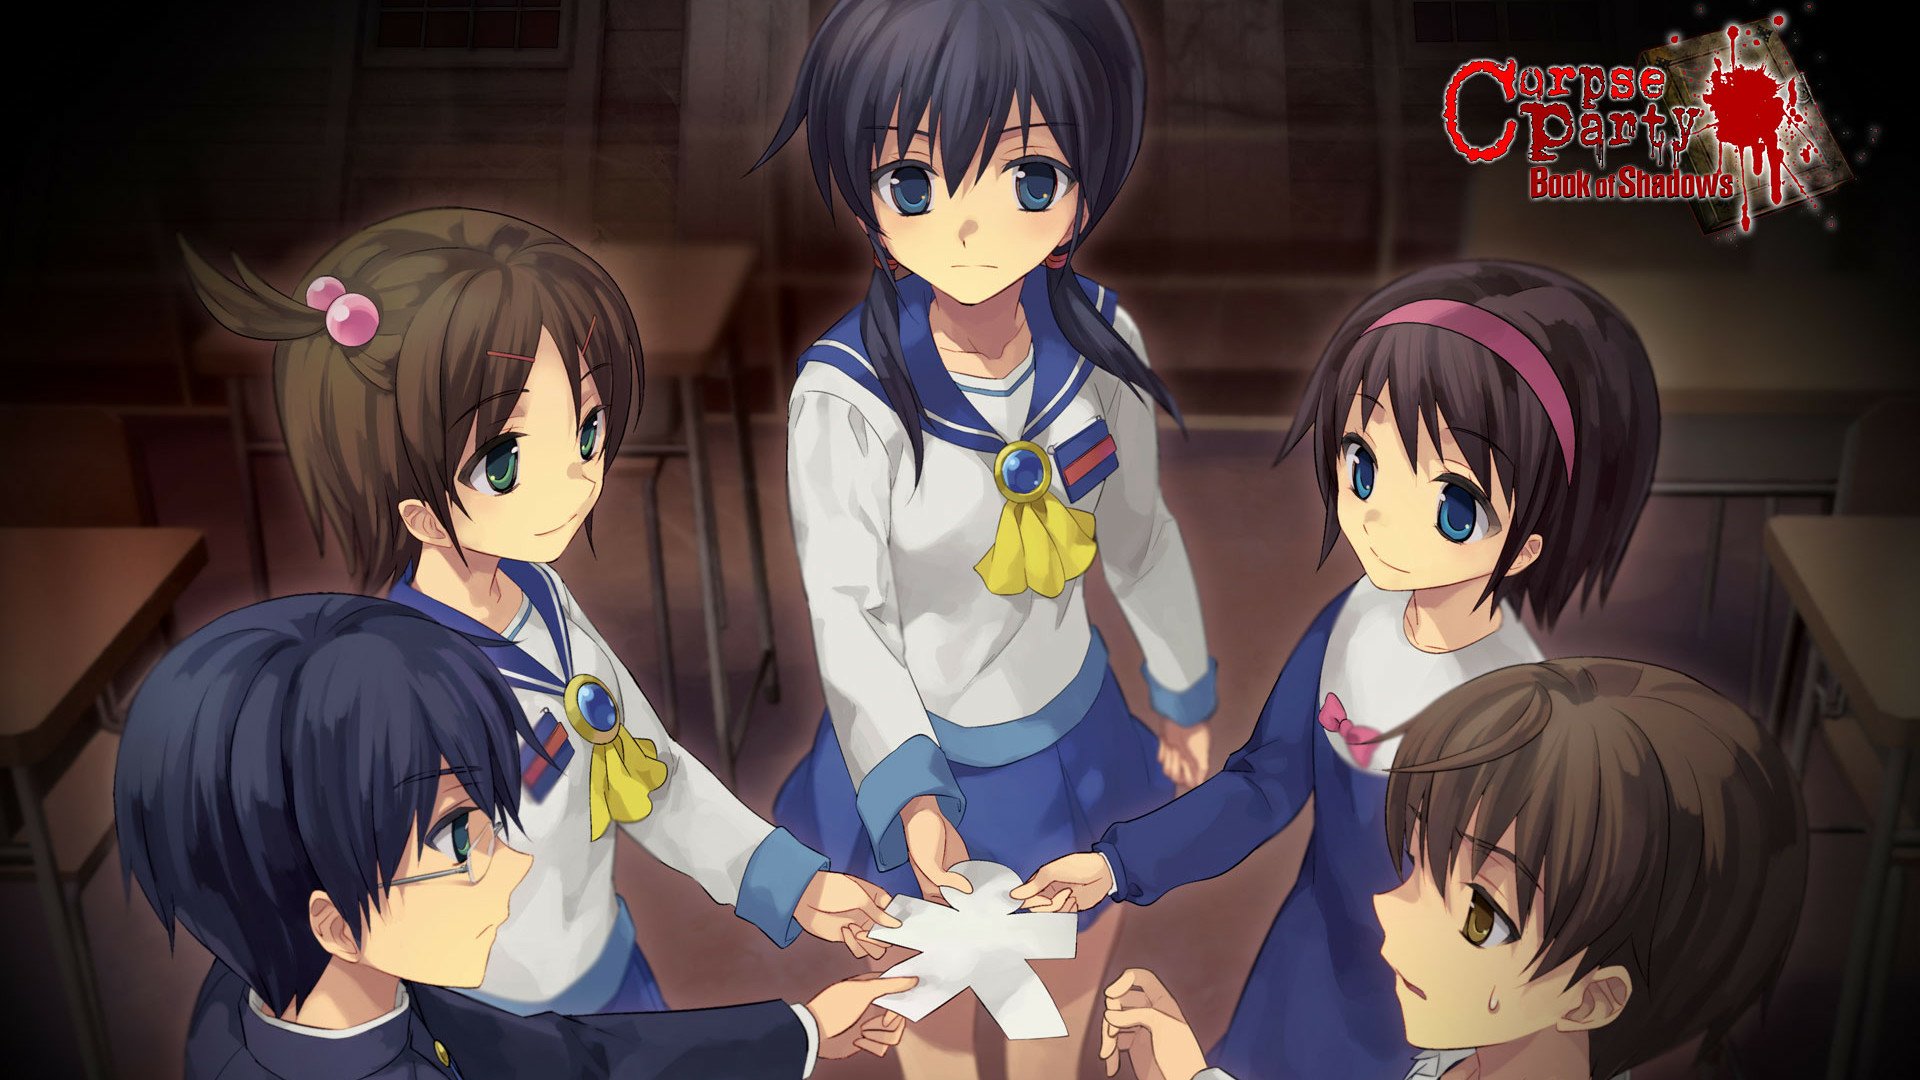 Corpse Party Is Now Available For Xbox One And Xbox Series X|S - Xbox Wire